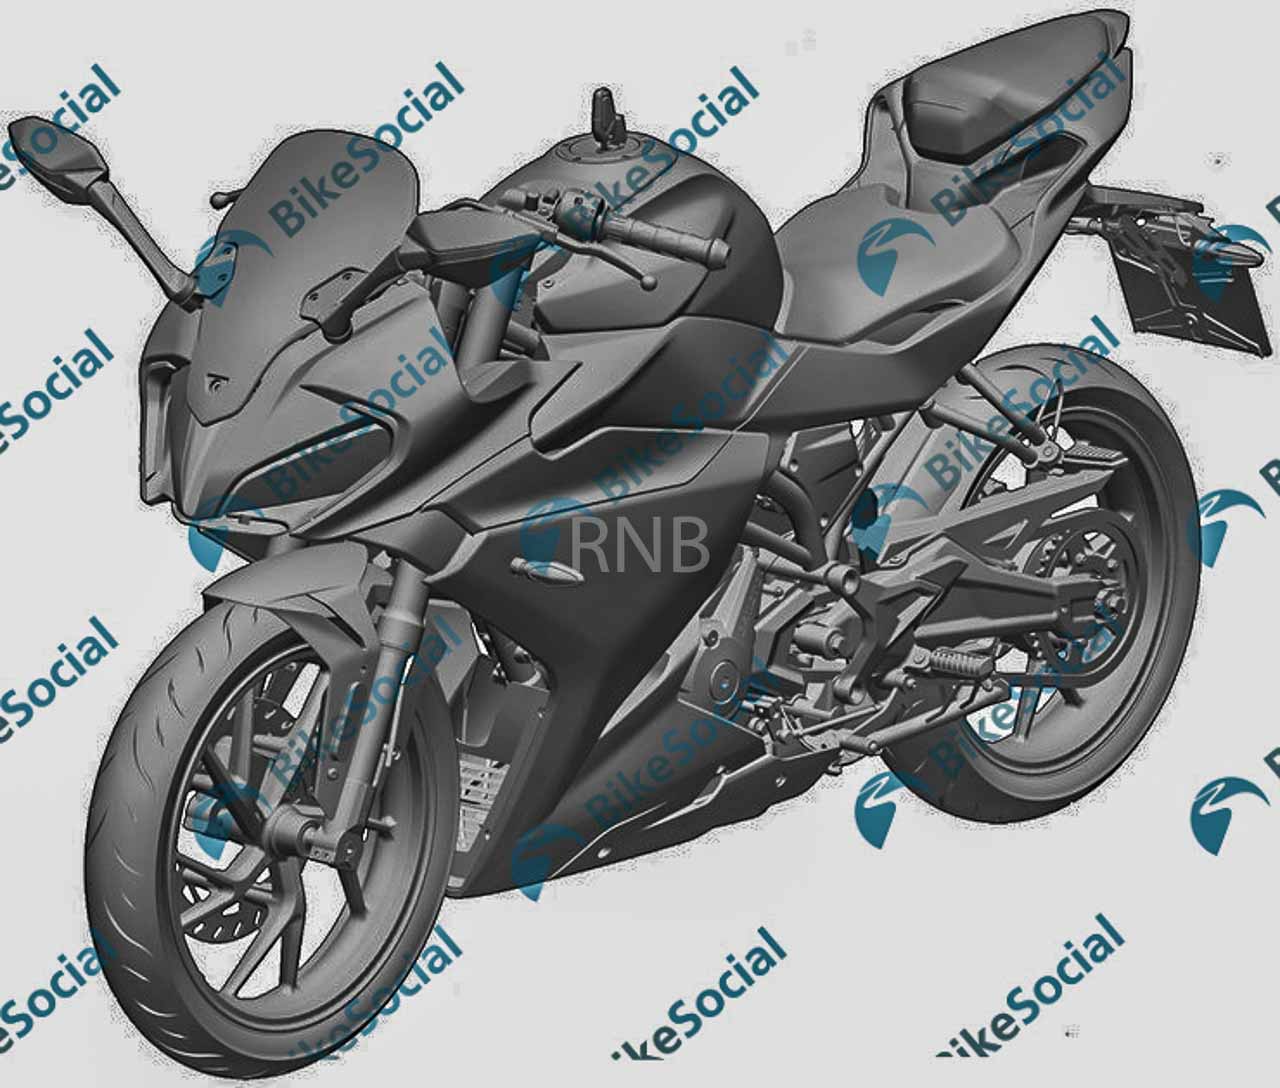 CF Moto 300SR fully faired motorcycle